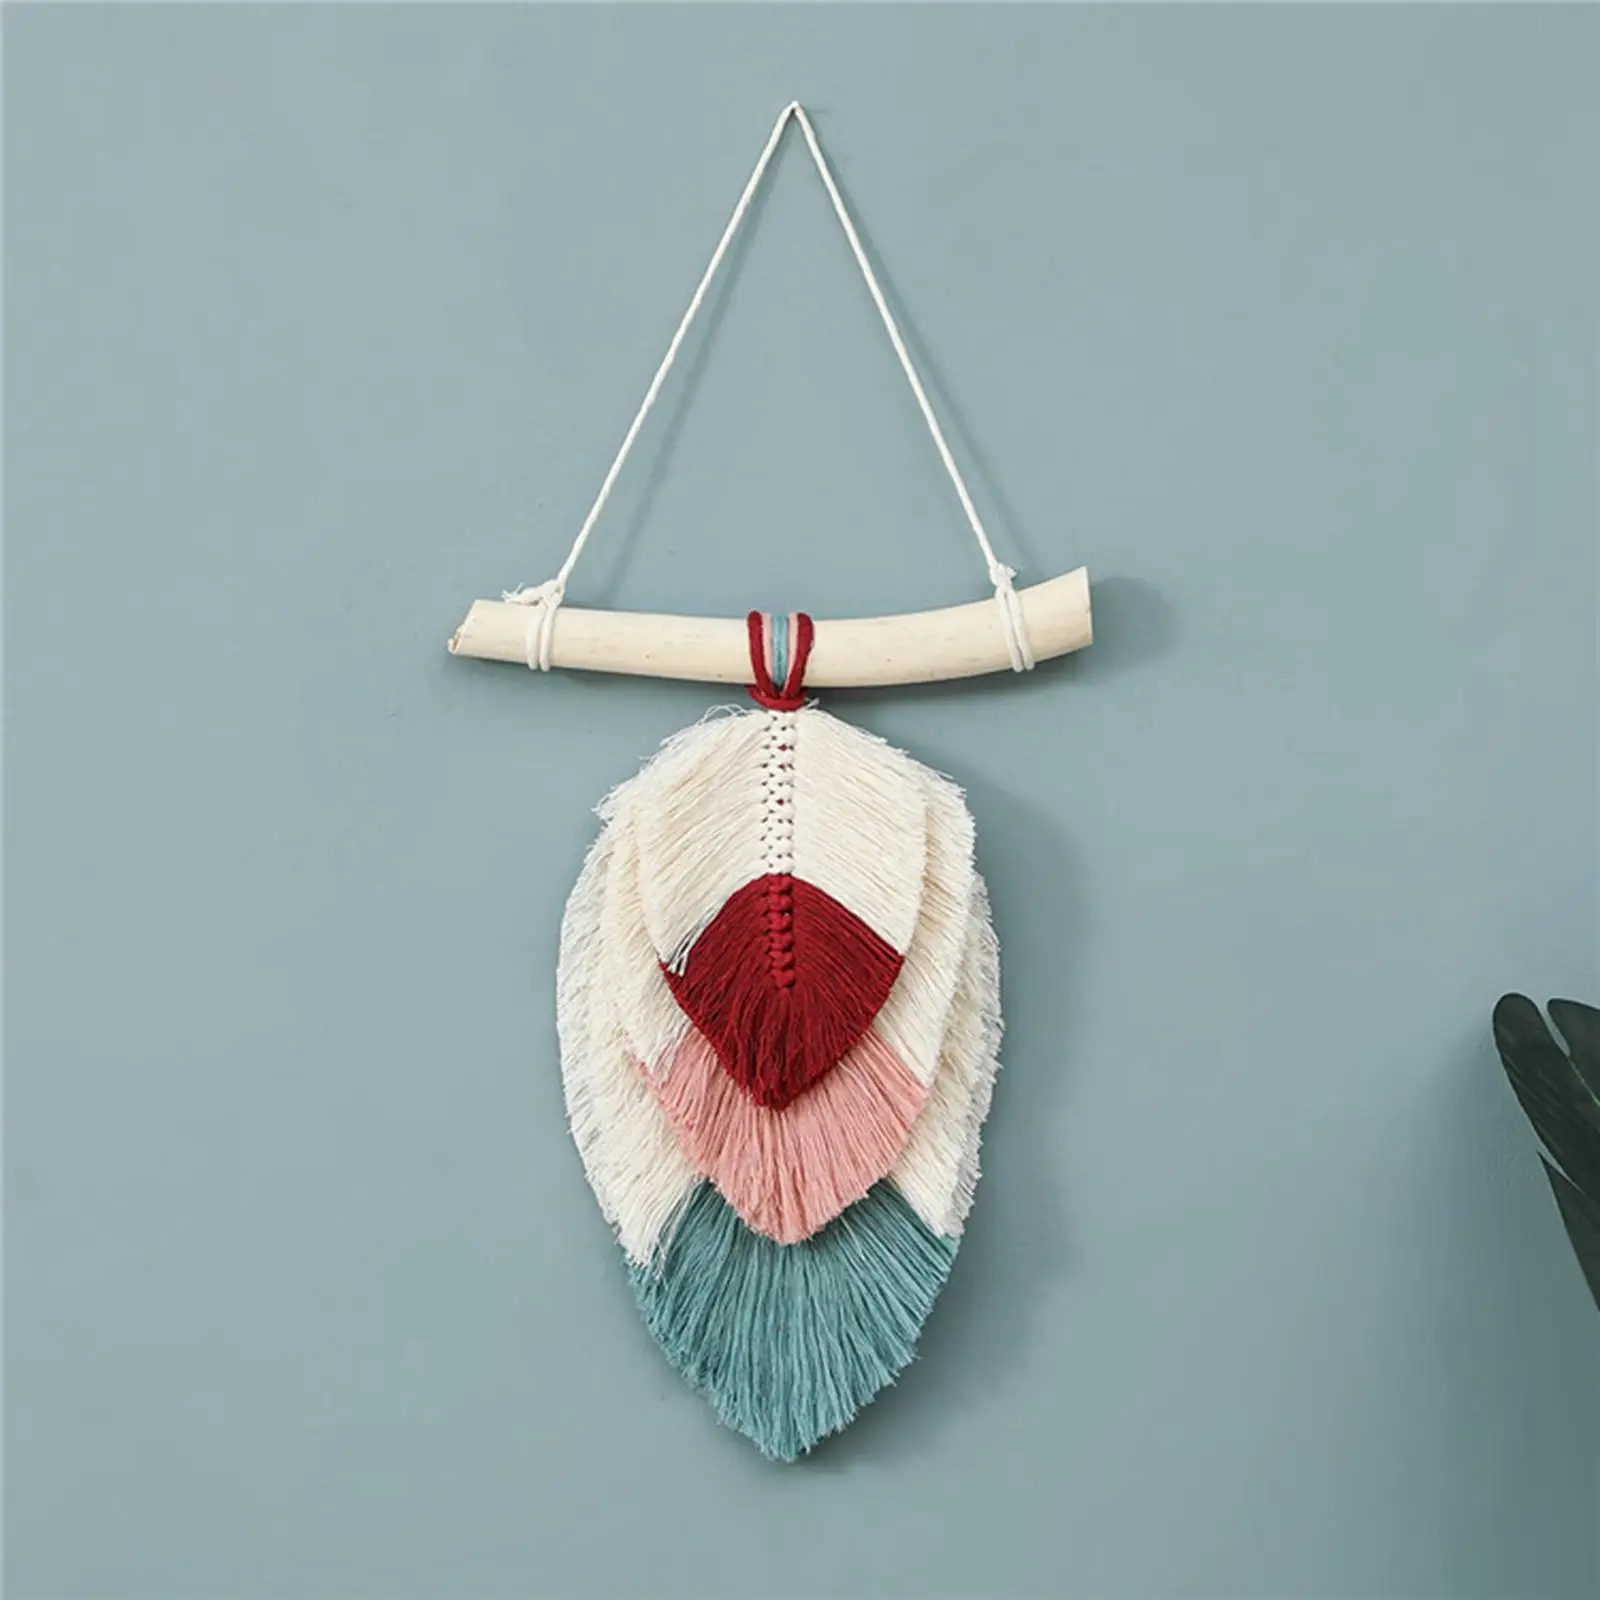 Nordic Macrame Wall Hanging Tapestry Handwoven Wall Art Pendant for Living Room Dorm Bedroom Party Ornament